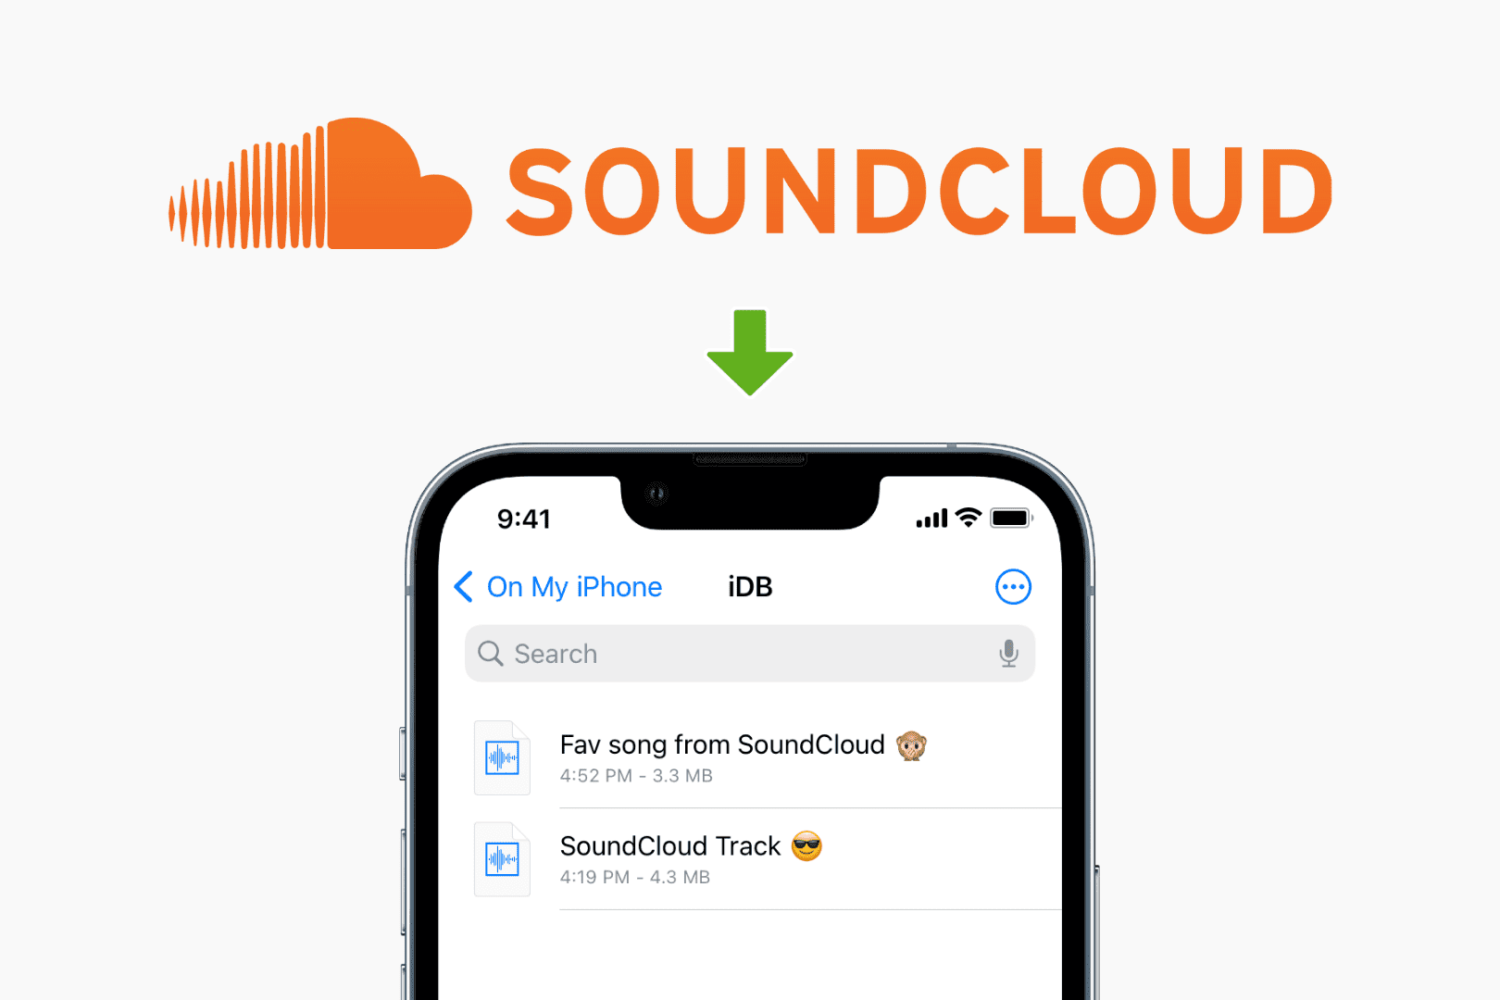 Download music from SoundCloud to iPhone